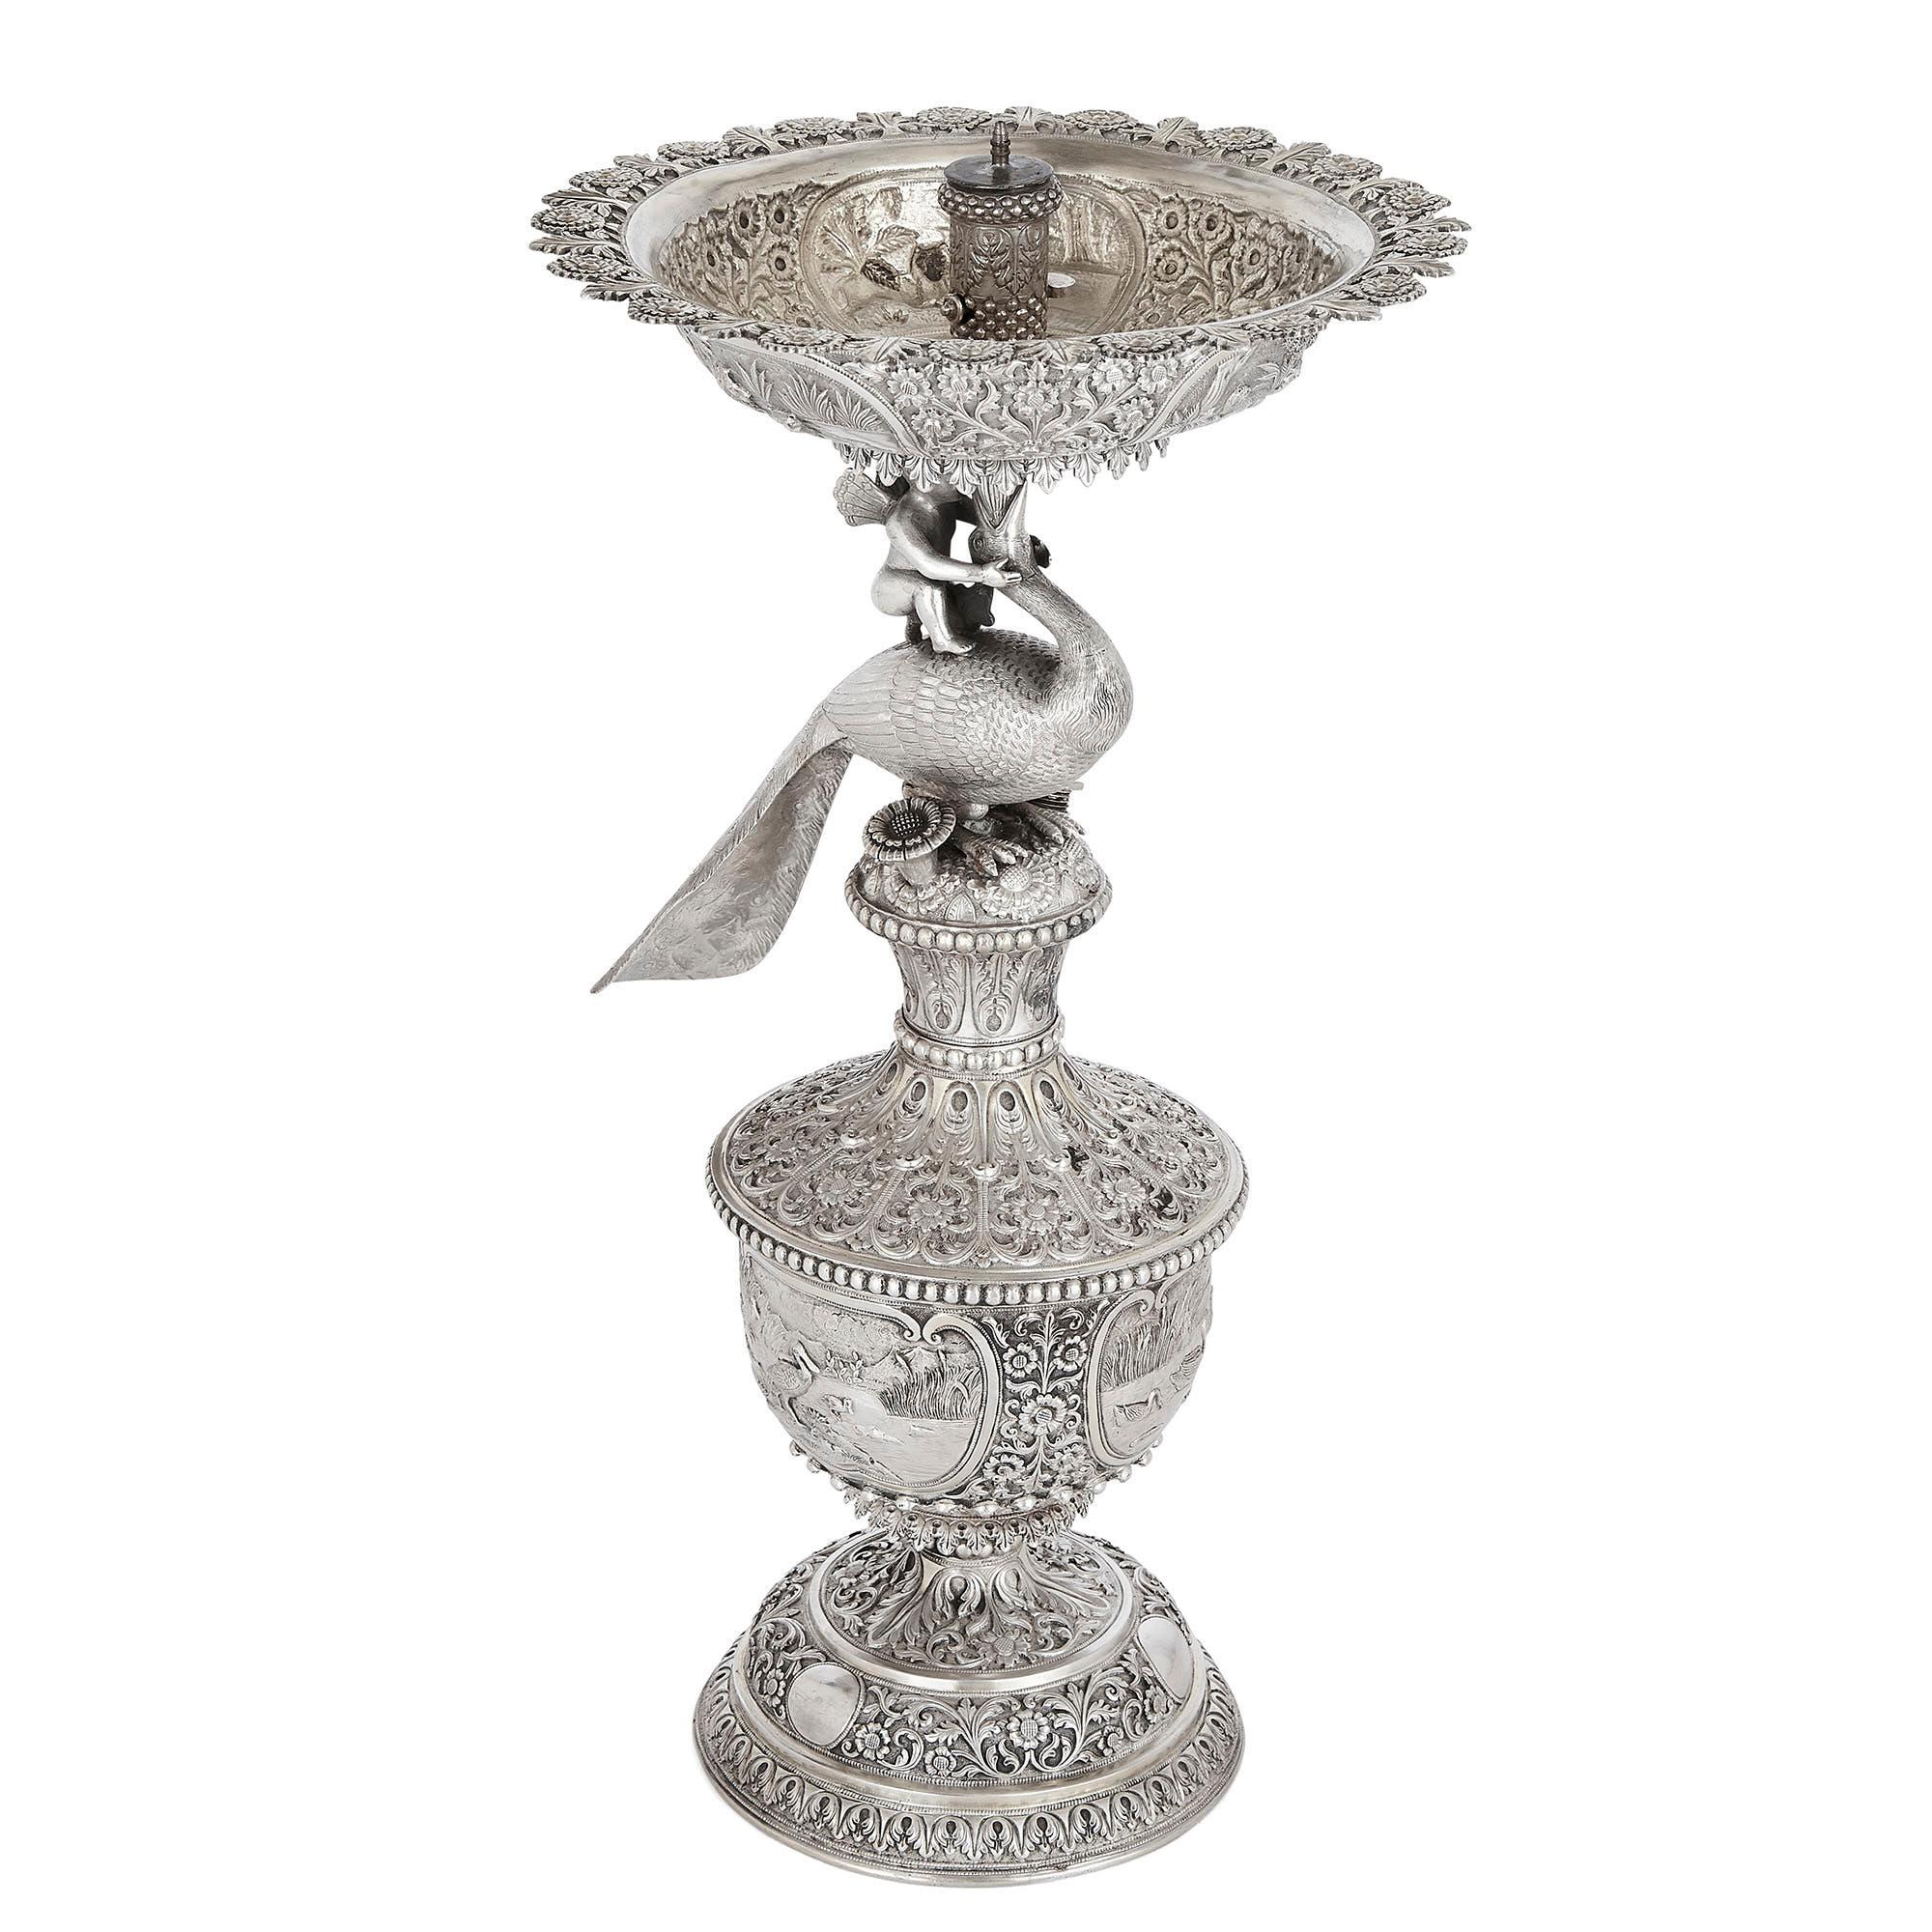 Indian engraved silver table fountain by Oomersi Mawji & Sons
Indian, late 19th century
Measures: Height 40cm, width 23cm, depth 21cm

This exceptional table fountain is by the celebrated Indian silversmiths Oomersi Mawji & Sons, which is